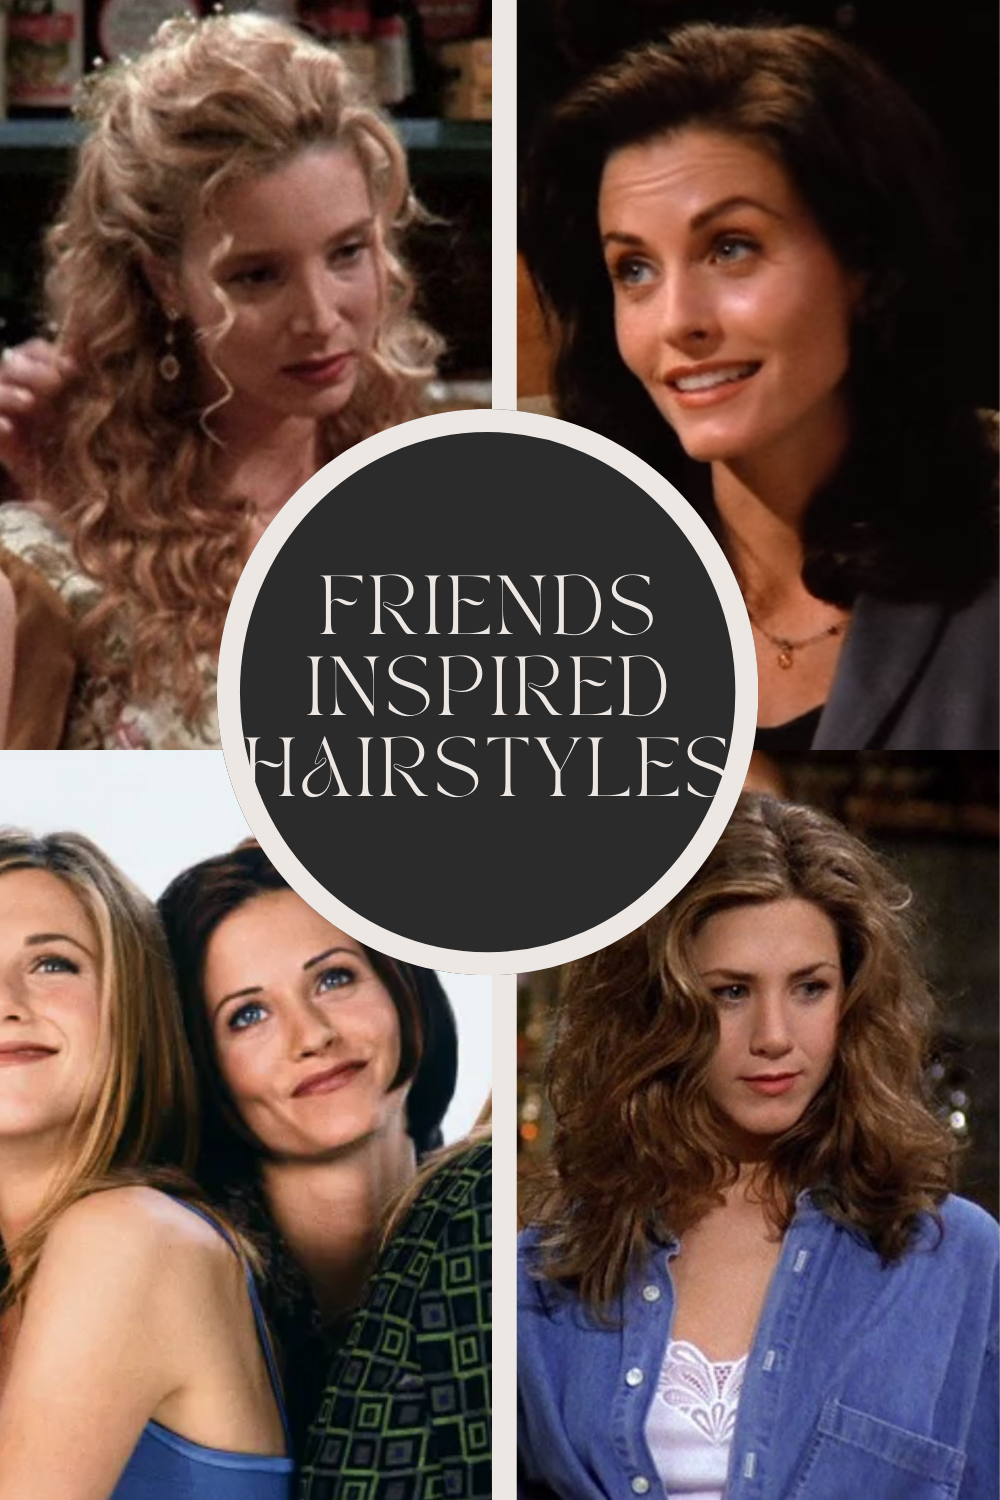 FRIENDS inspired hairstyles